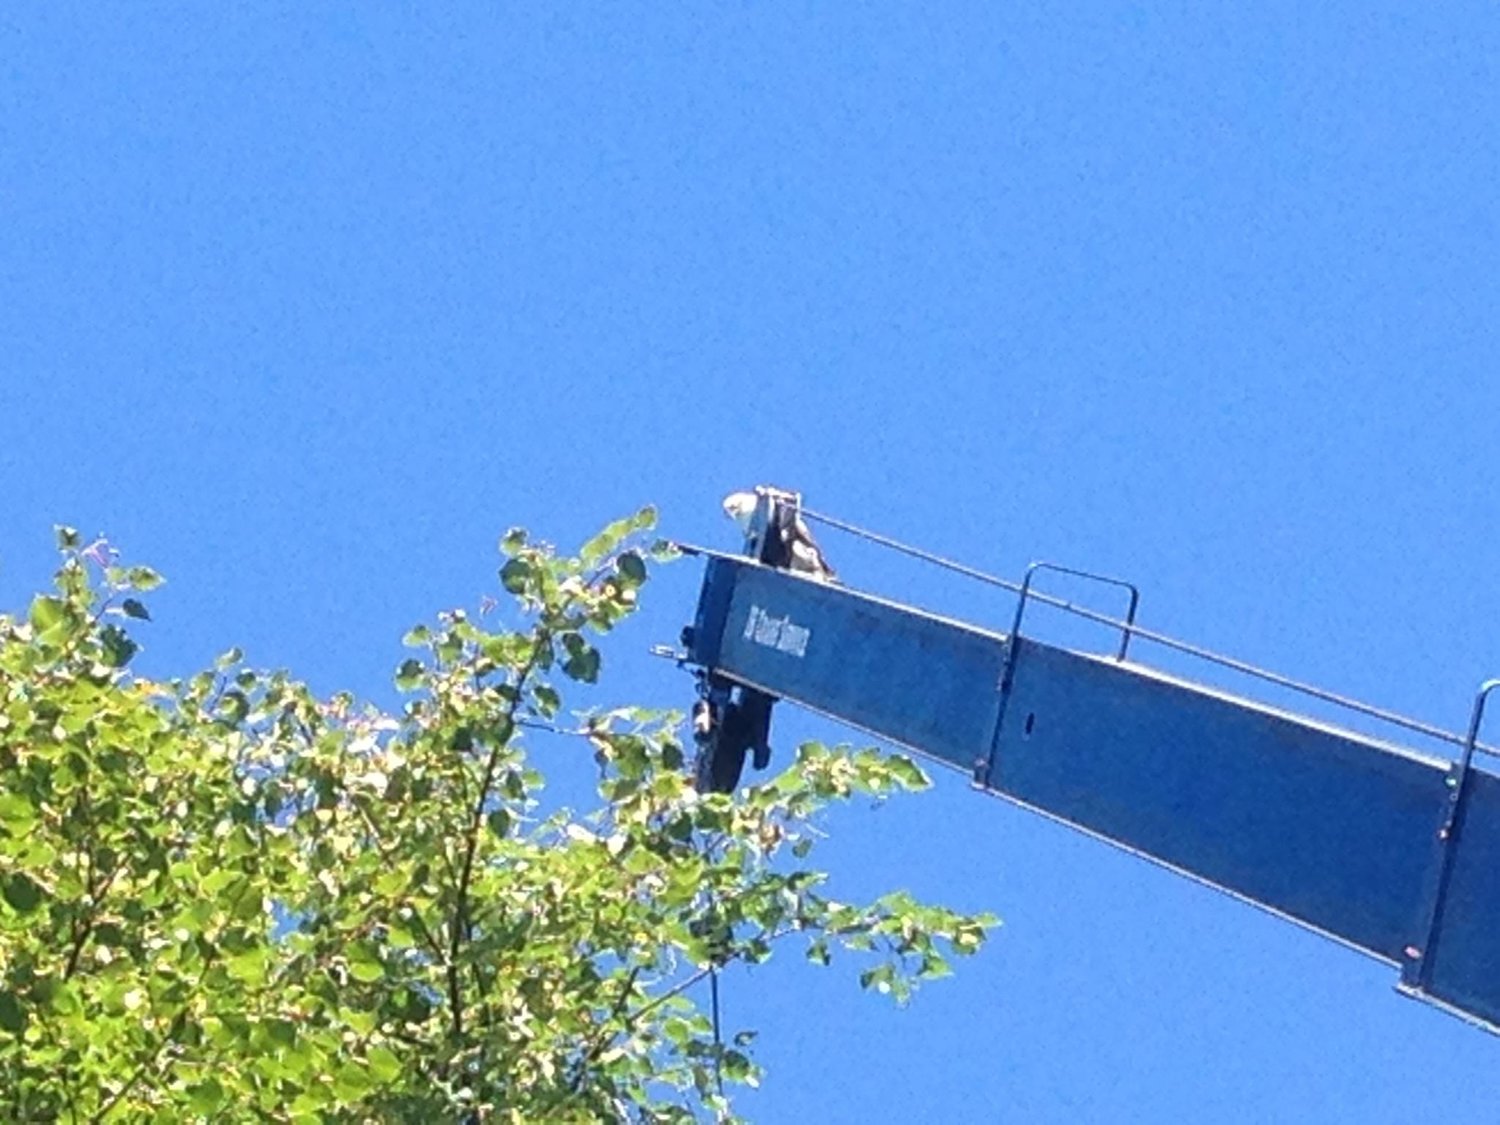 What appears to be a bald eagle resting on top of our crane boom.